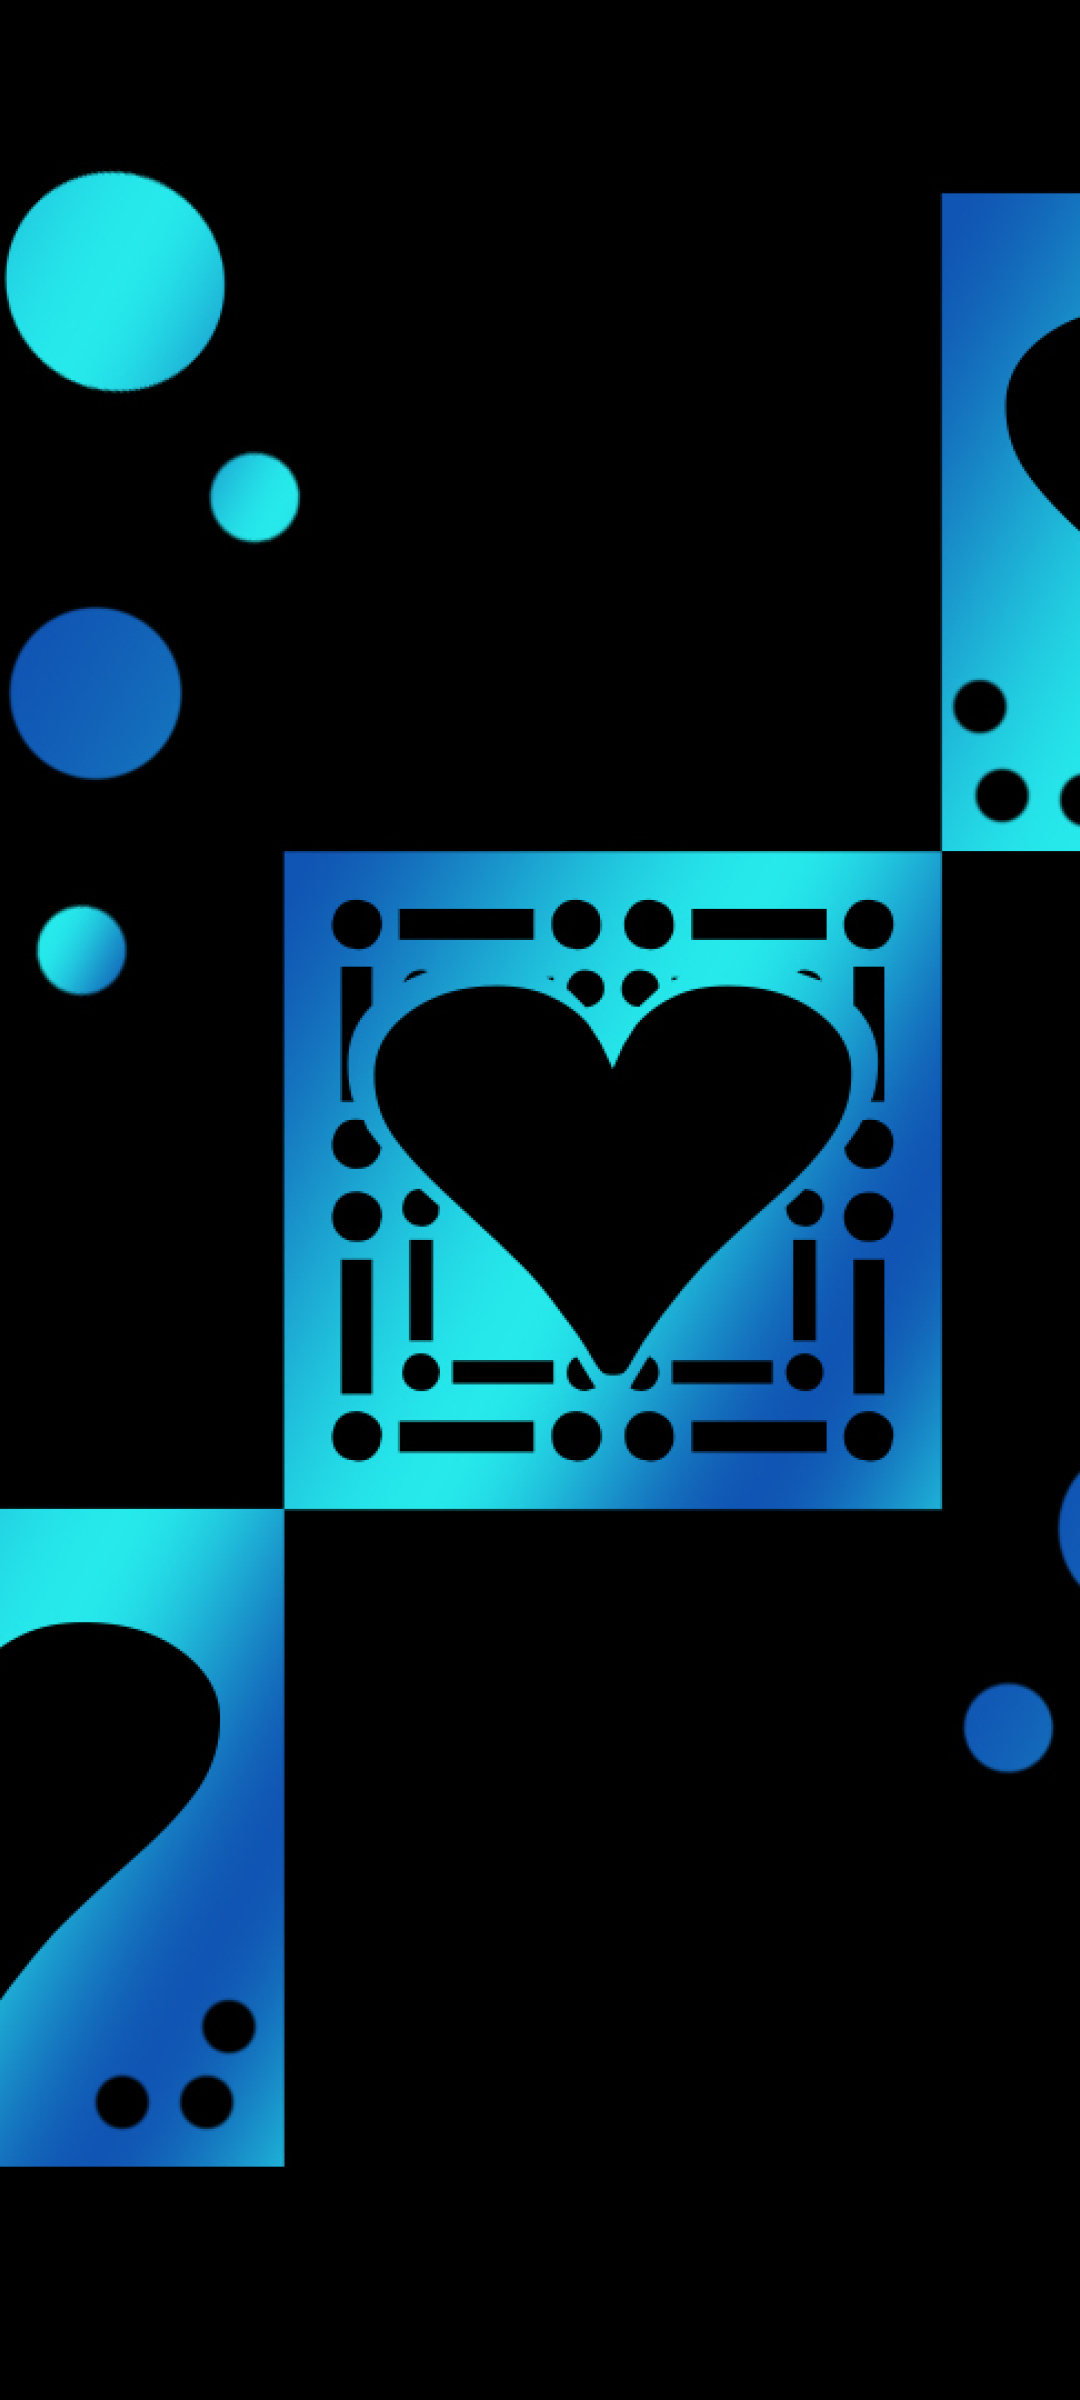 1080x2400 Blue Color Heart and Circle Shapes 1080x2400 ...